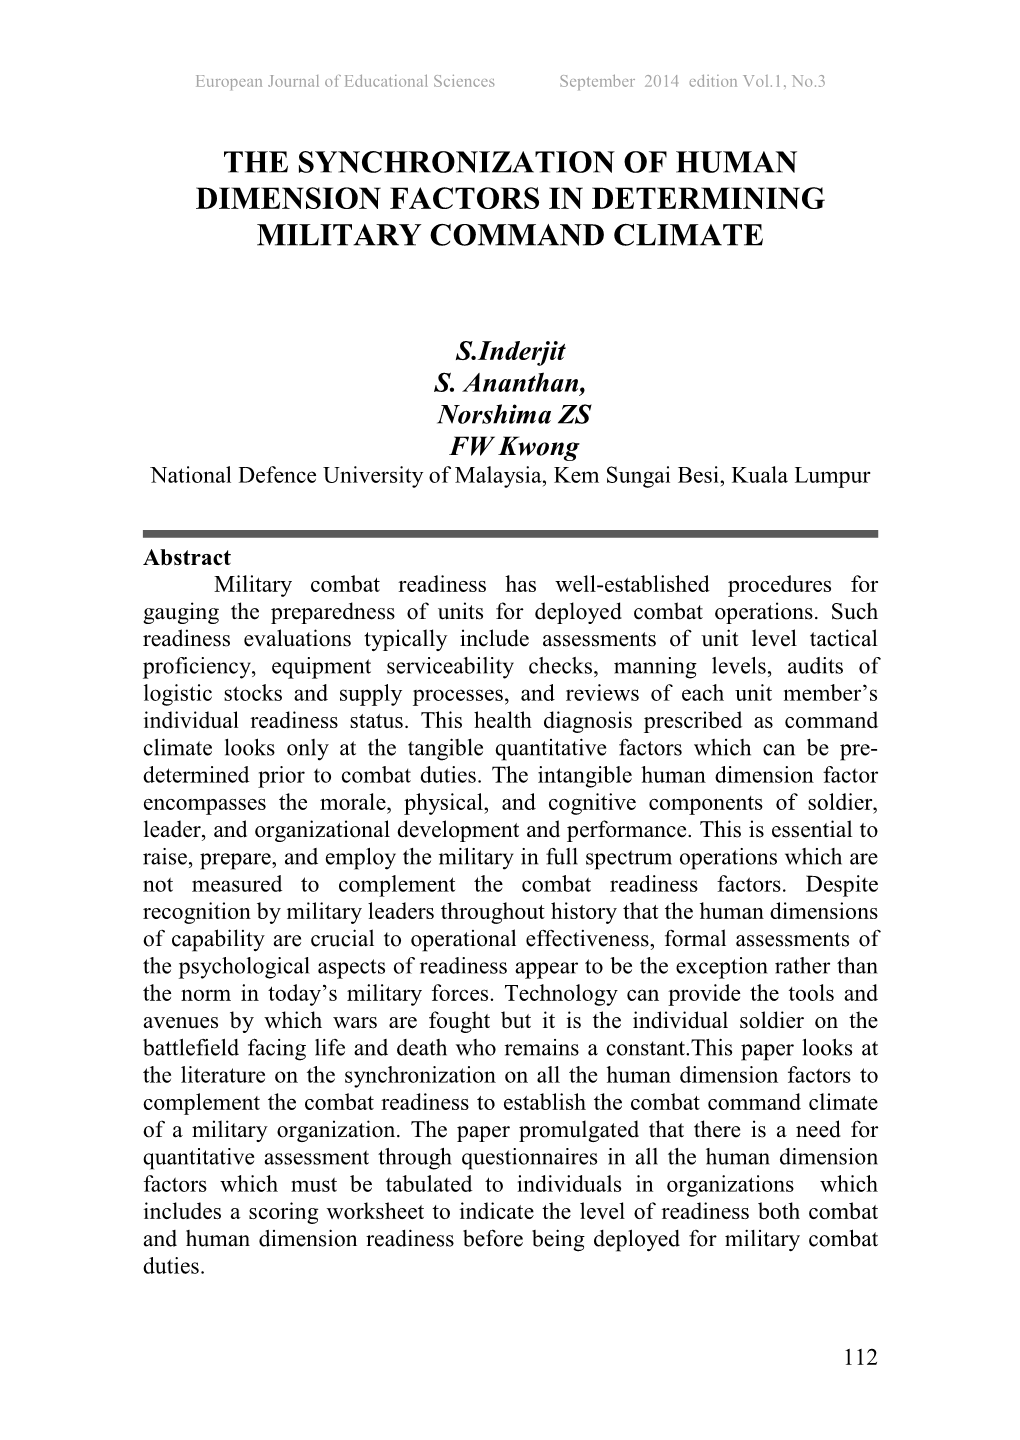 The Synchronization of Human Dimension Factors in Determining Military Command Climate